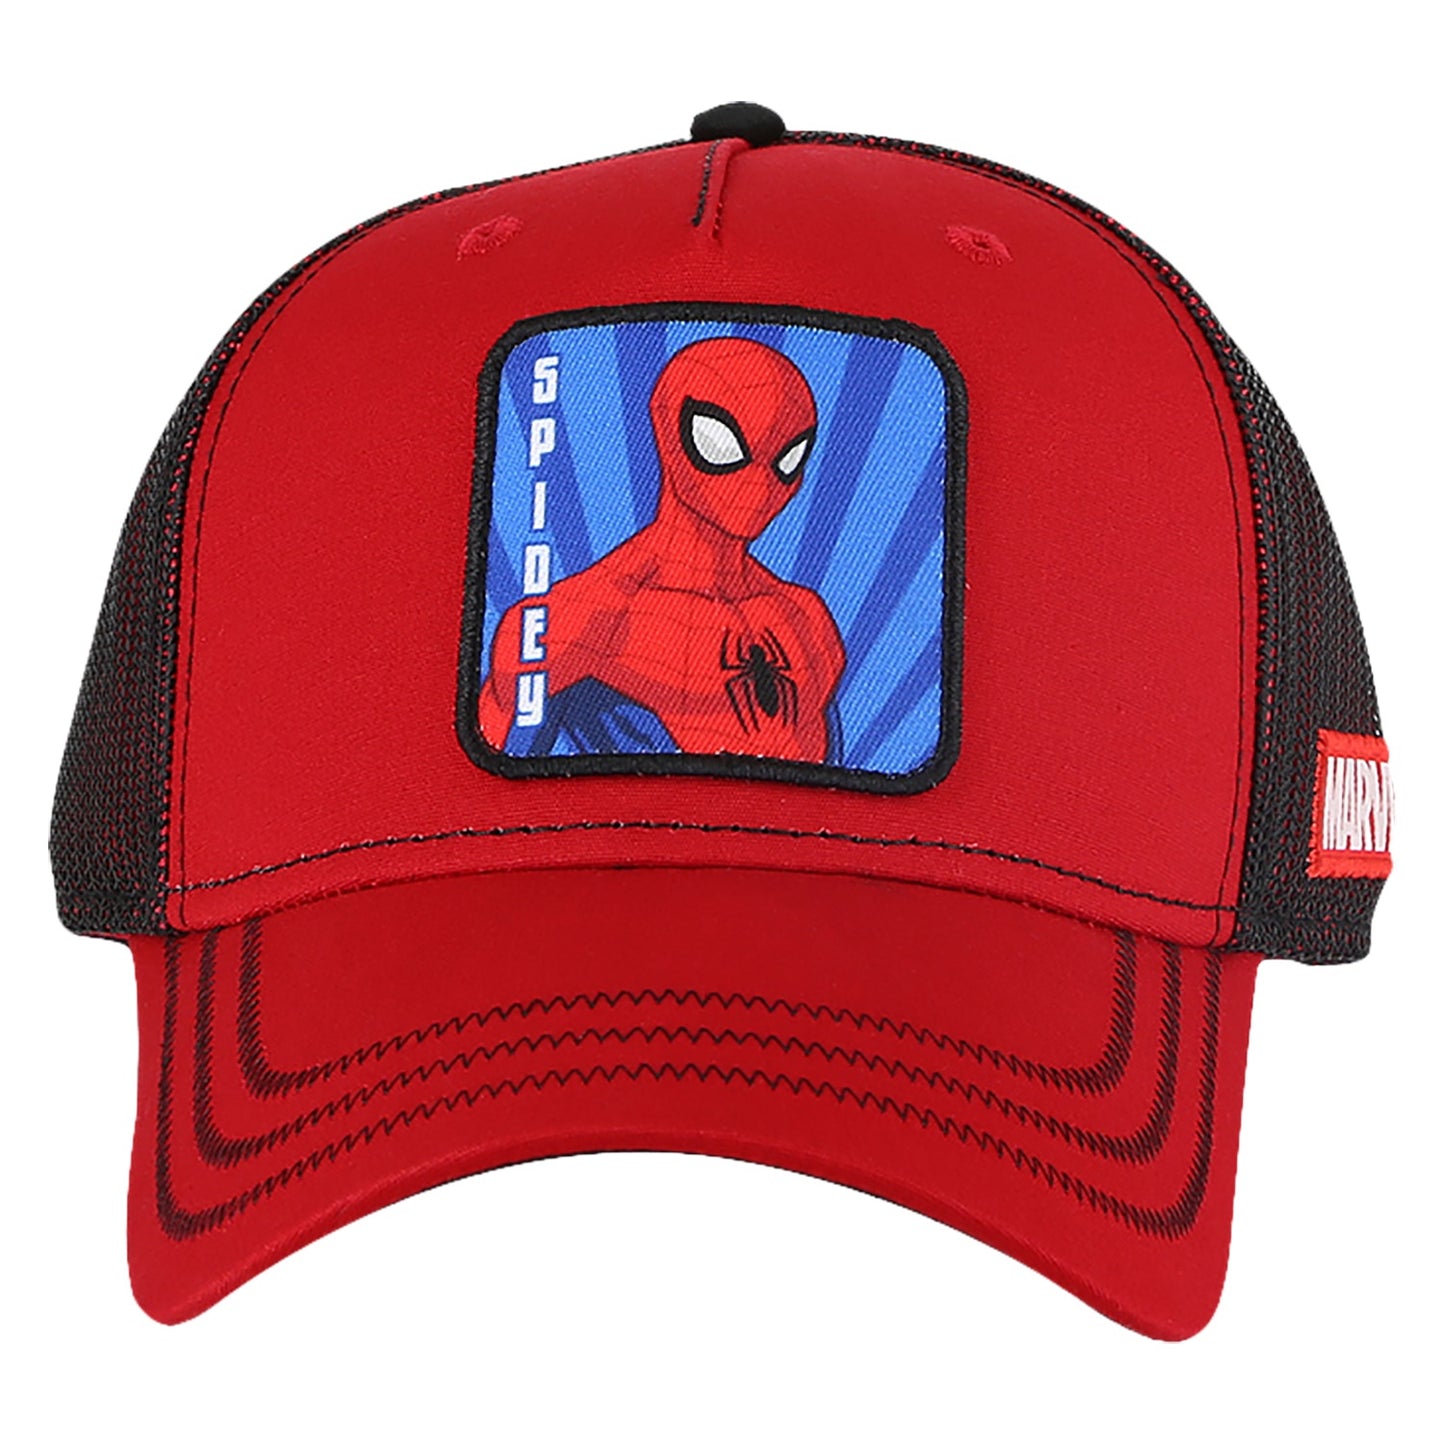 Spider-Man Baseball Cap in Red and Black